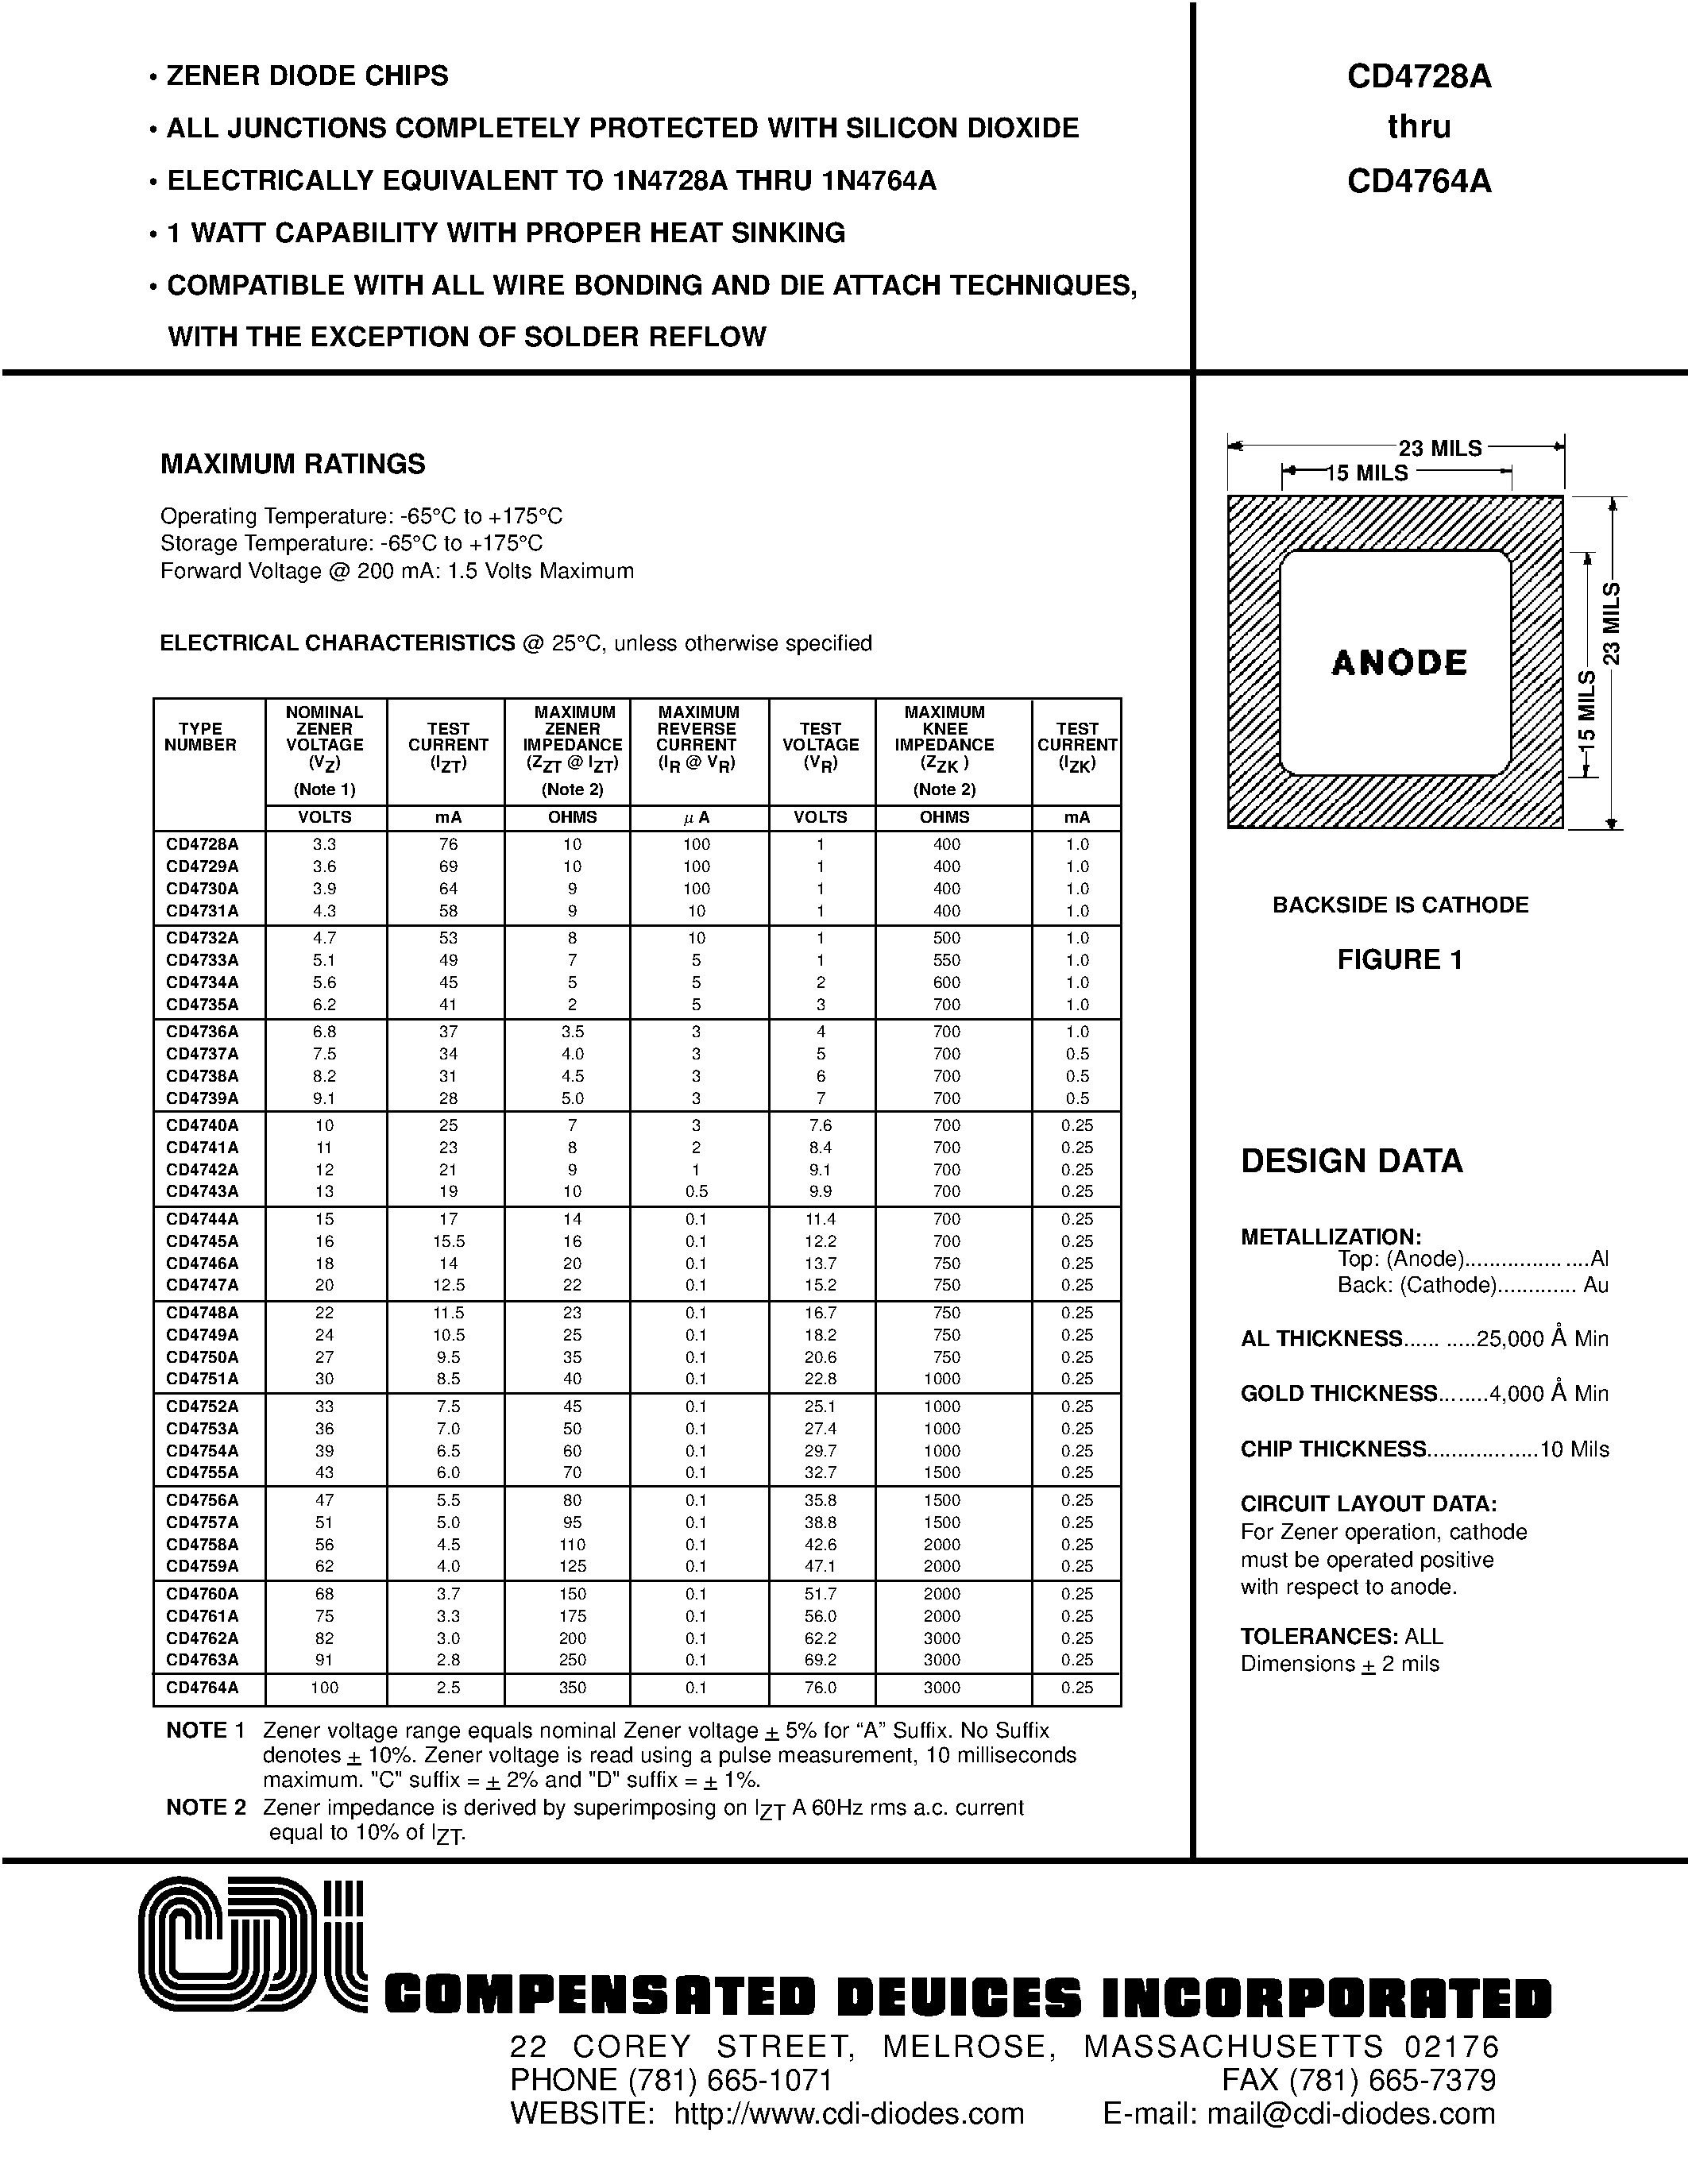 Datasheet CD4741A - ZENER DIODE CHIPS page 1